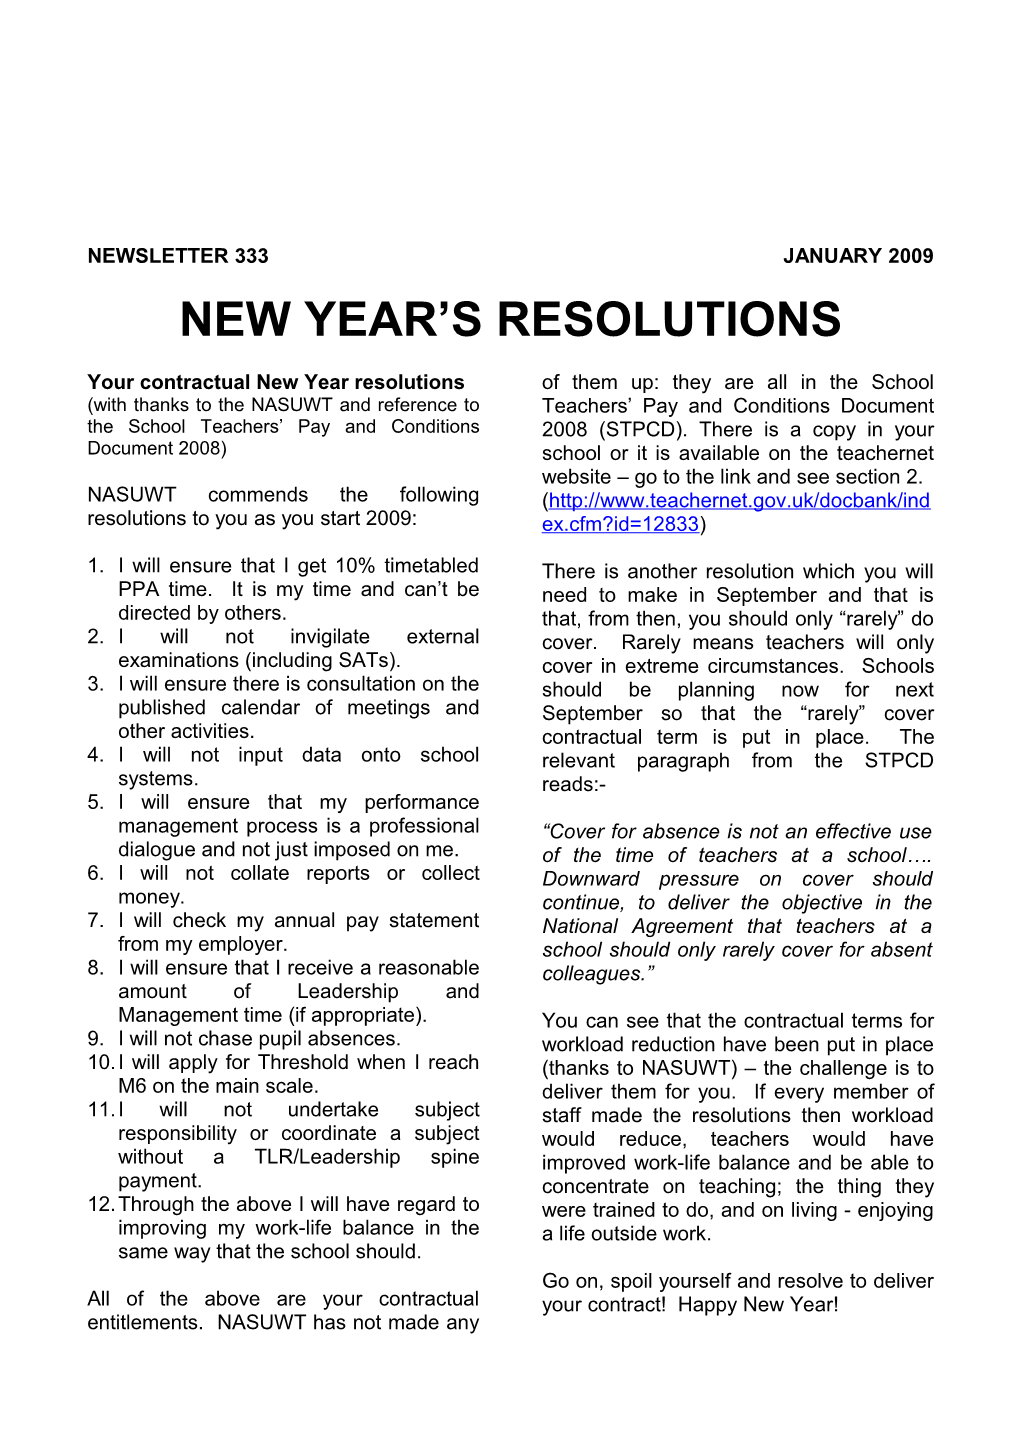 Your Contractual New Year Resolutions